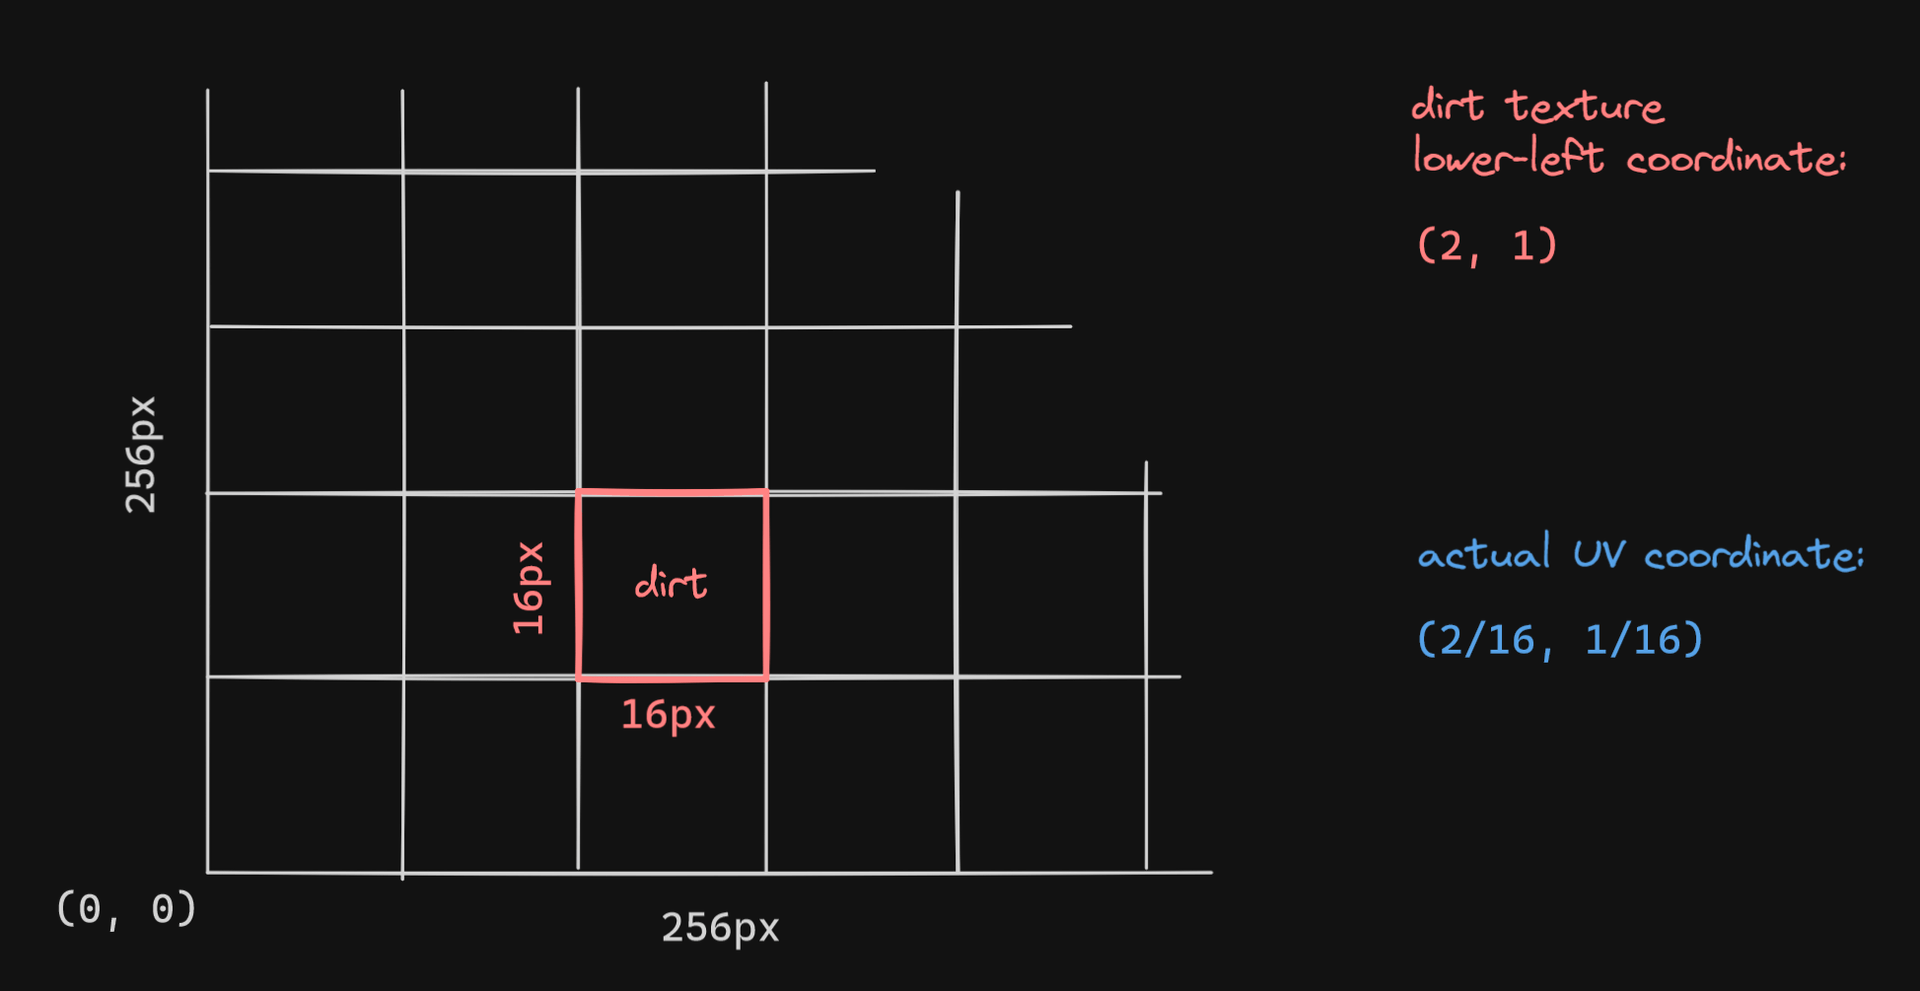 A dirt face texture at coordinate (2, 1) corresponds to (2/16, 1/16) in UV coordinates.